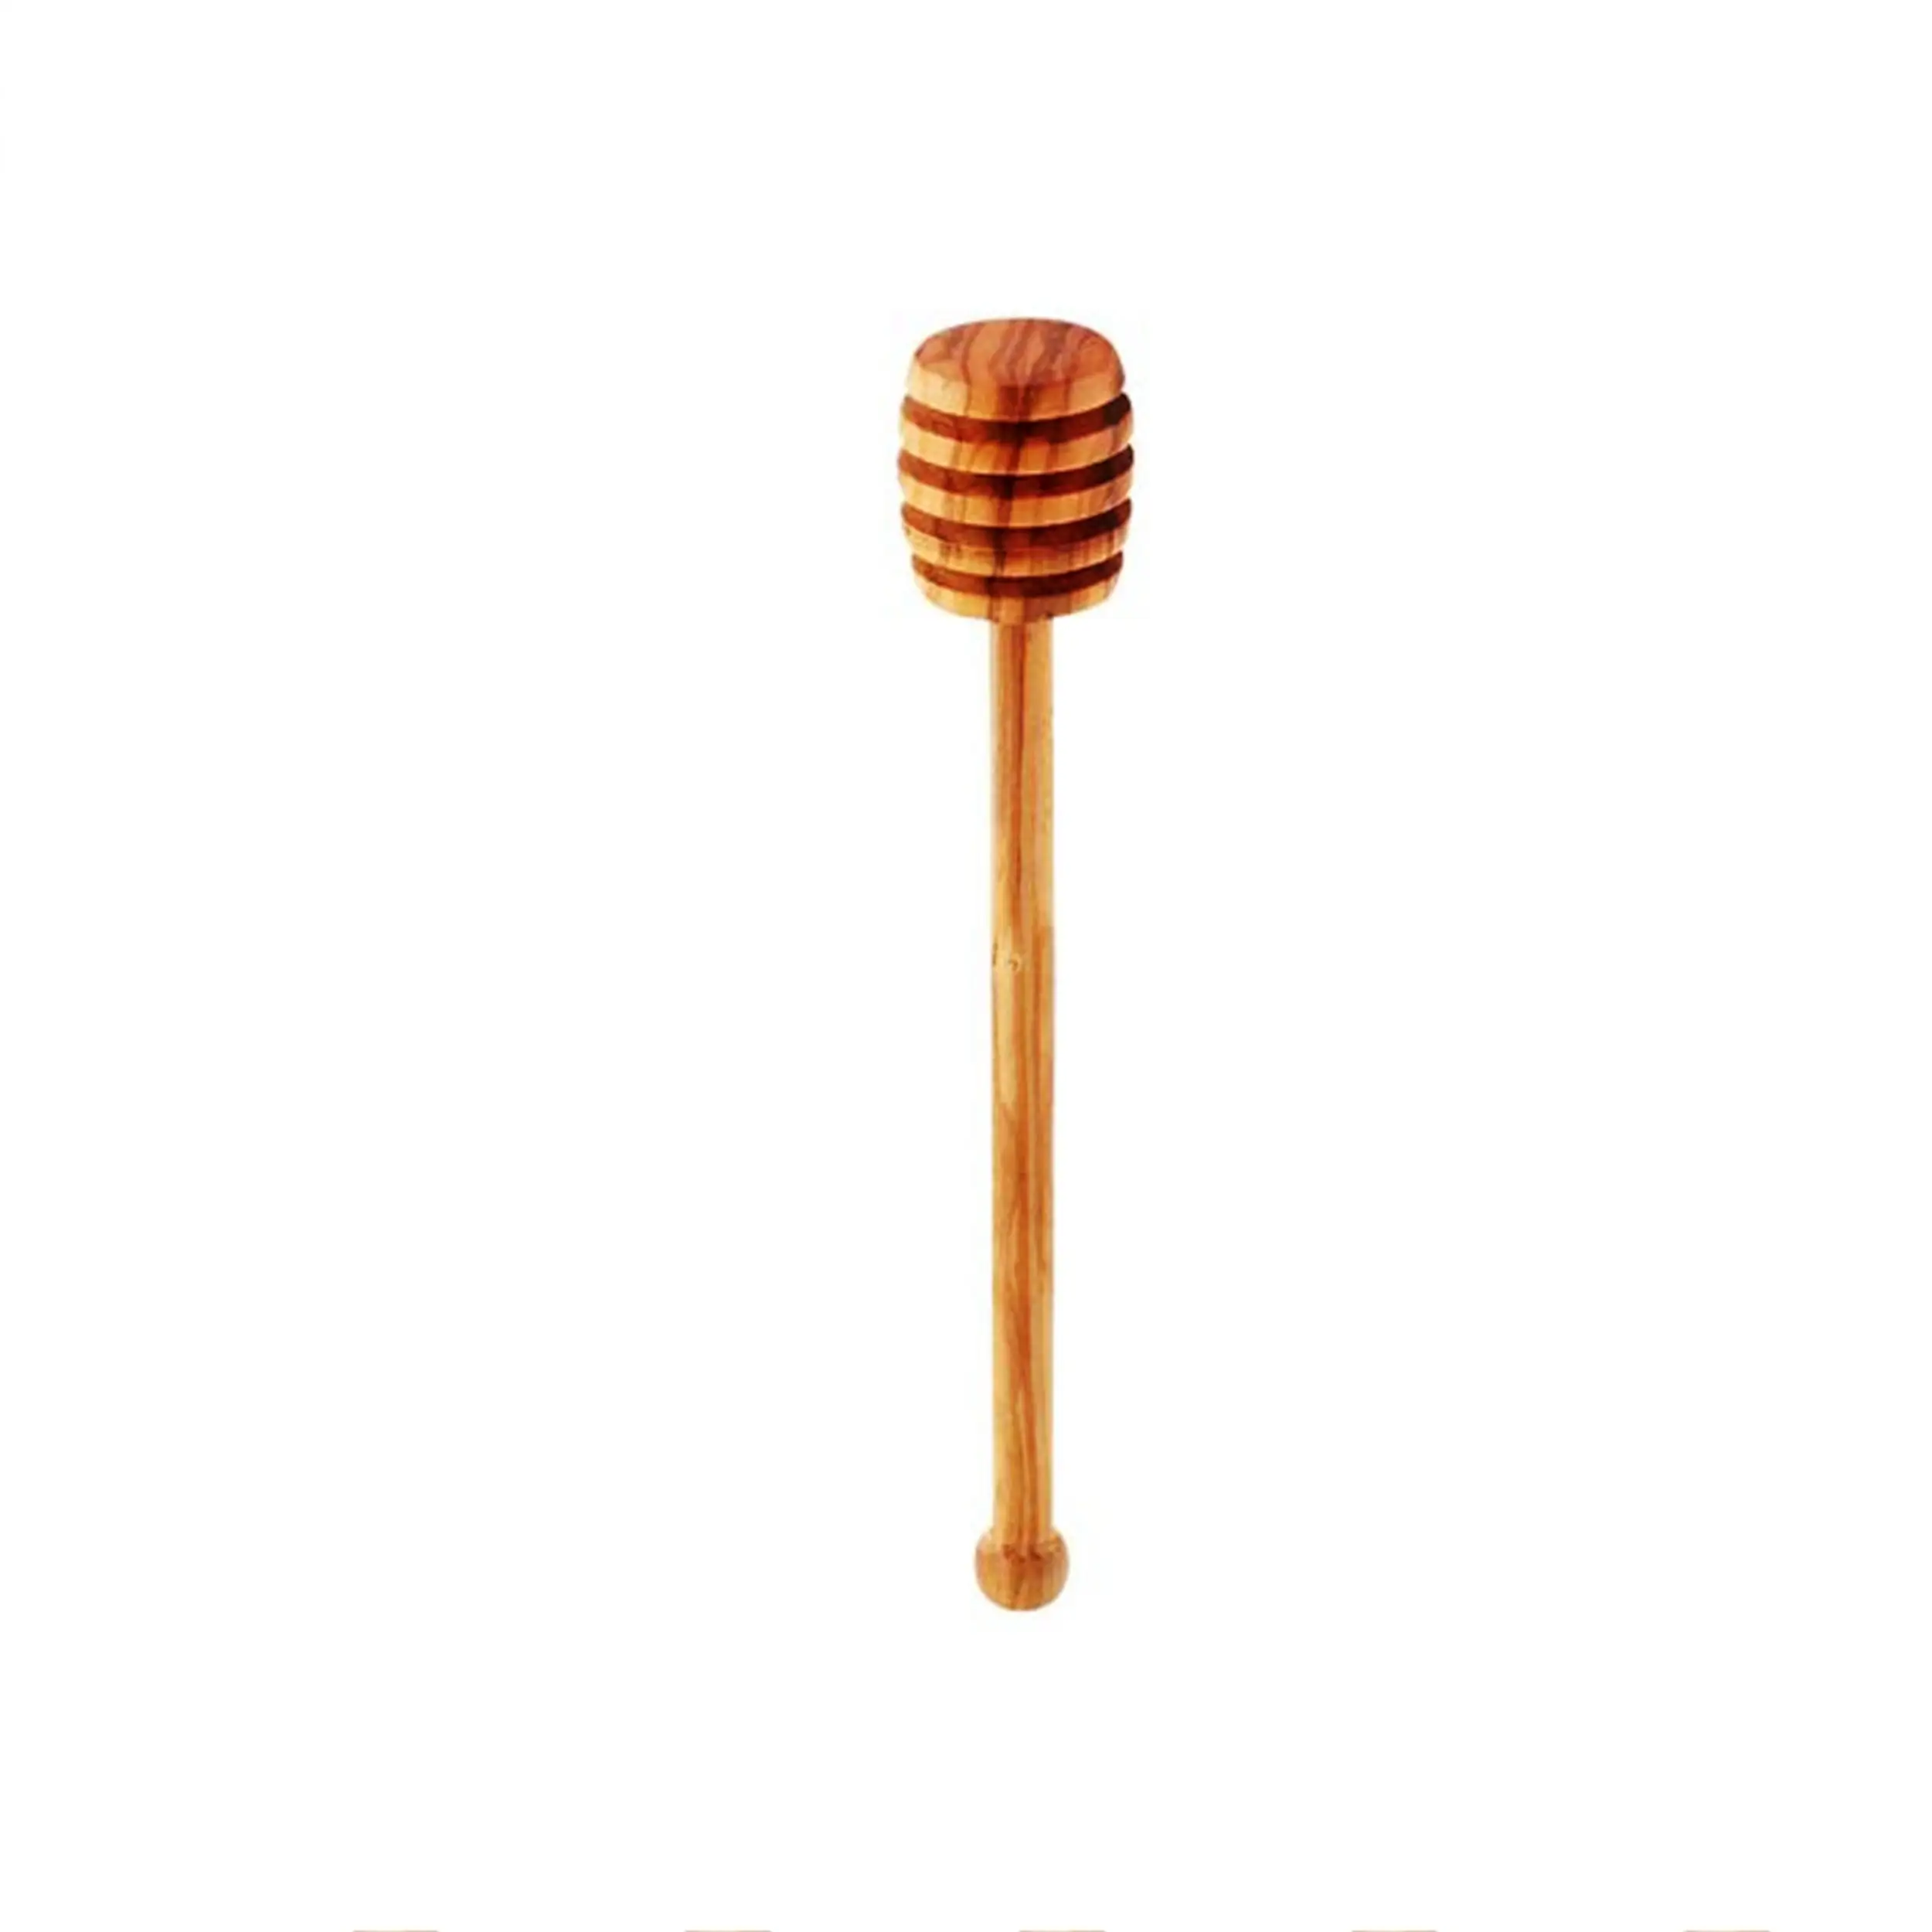 375 Honey and Syrup Dipper Stick Server 6 25in Custom engraved & Size wedding party favors gifts Natural Color Made In India